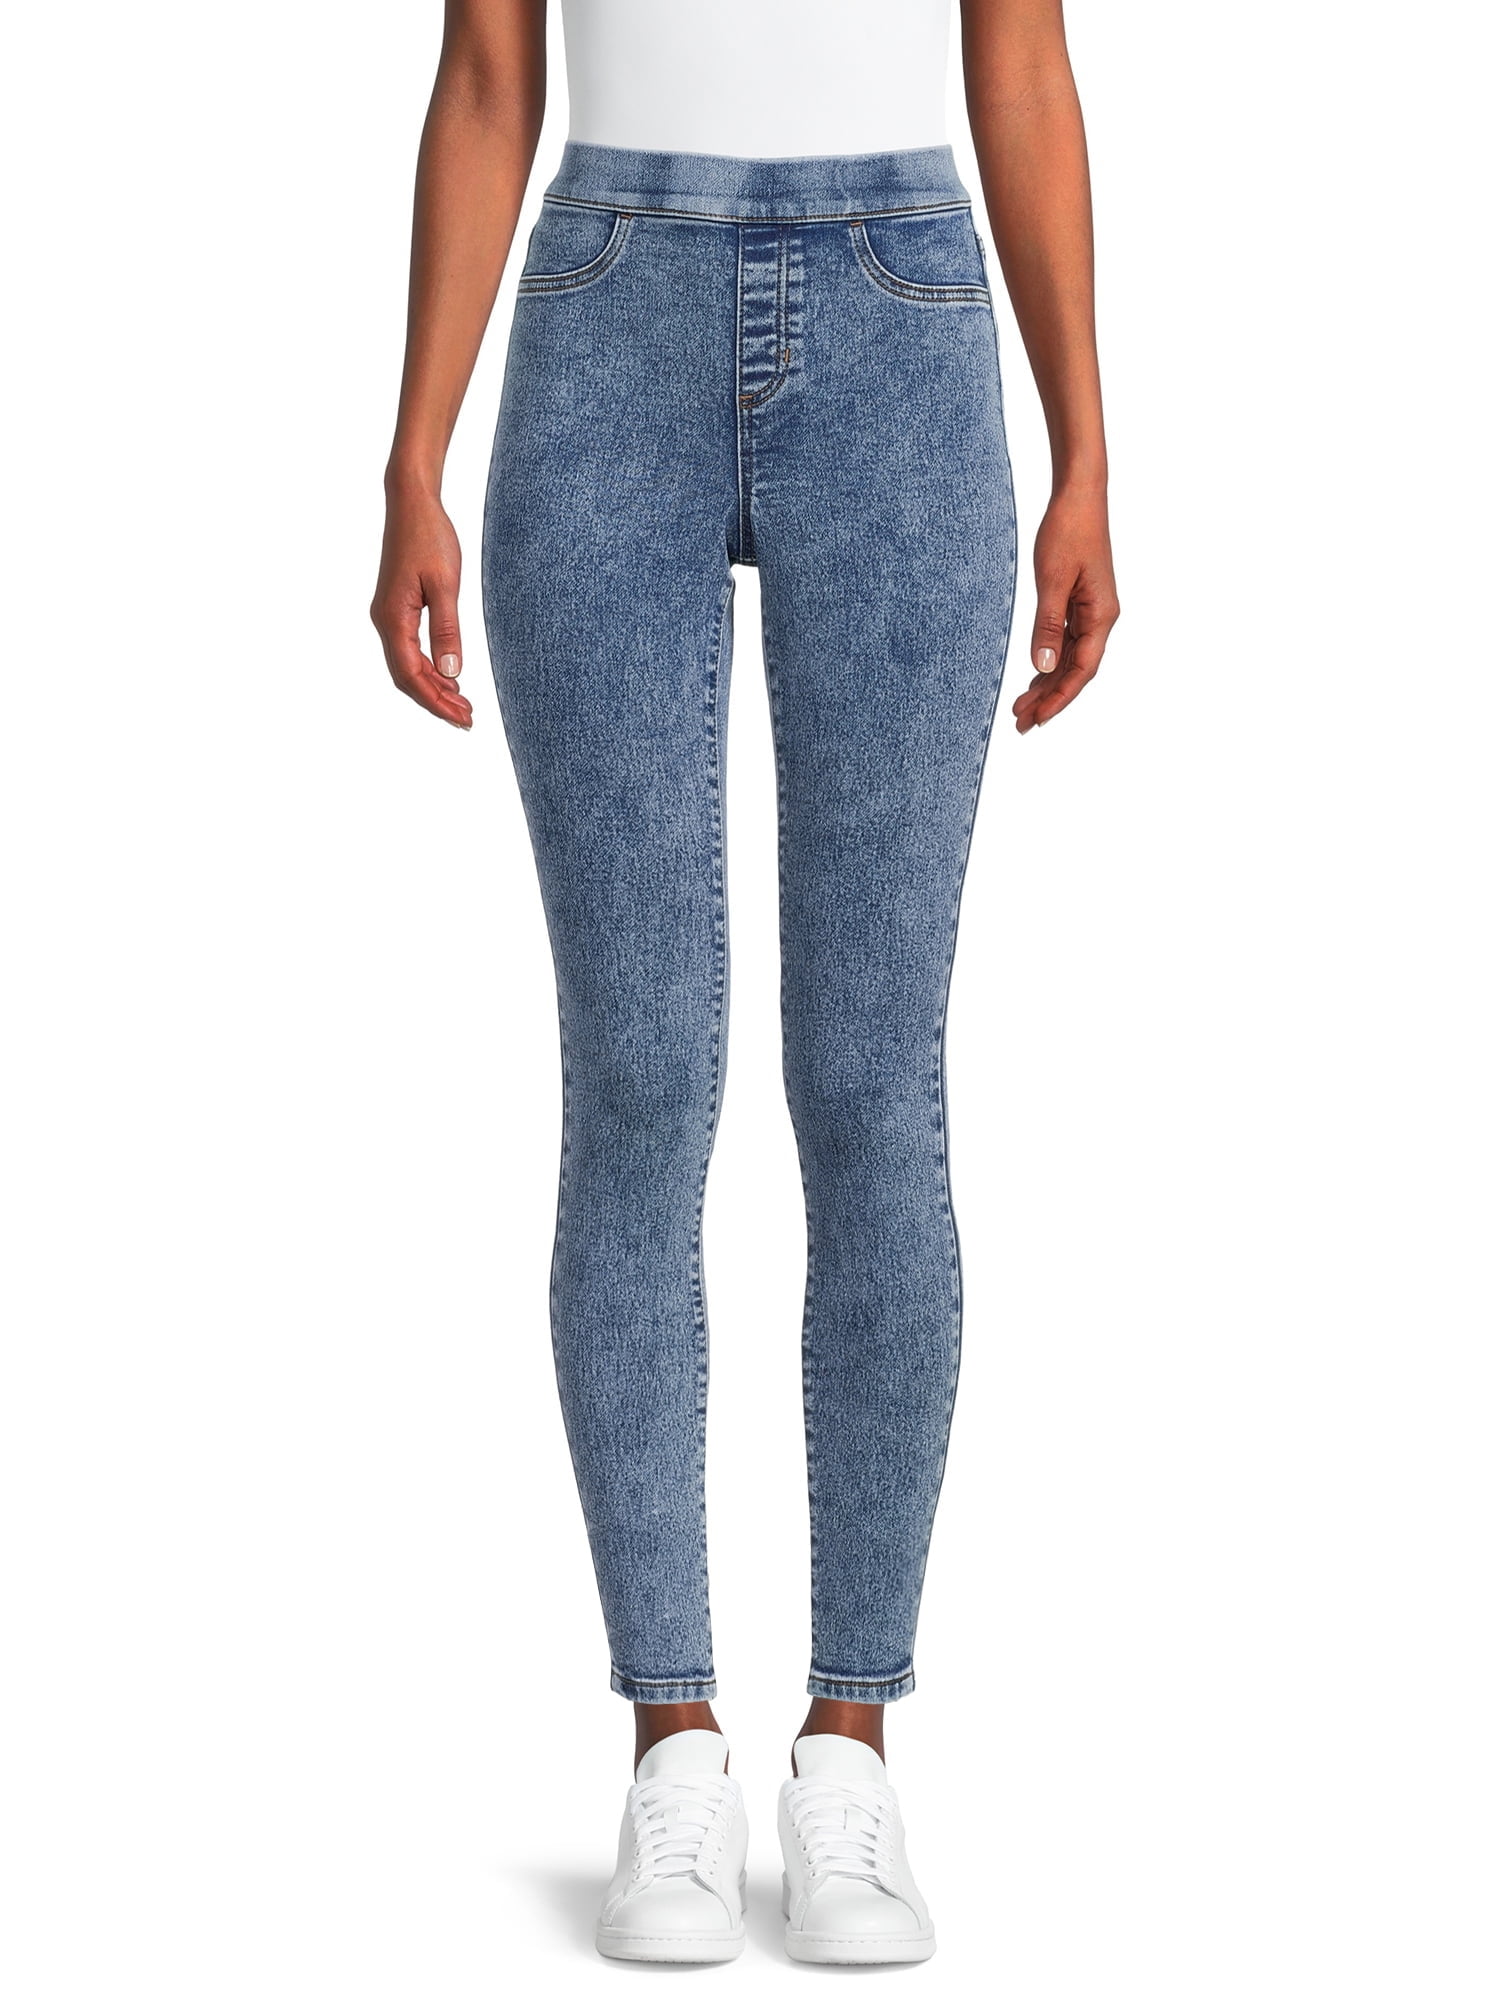 No Boundaries Dark Blue Jeggings Size L - $11 (38% Off Retail) - From  Taliyah